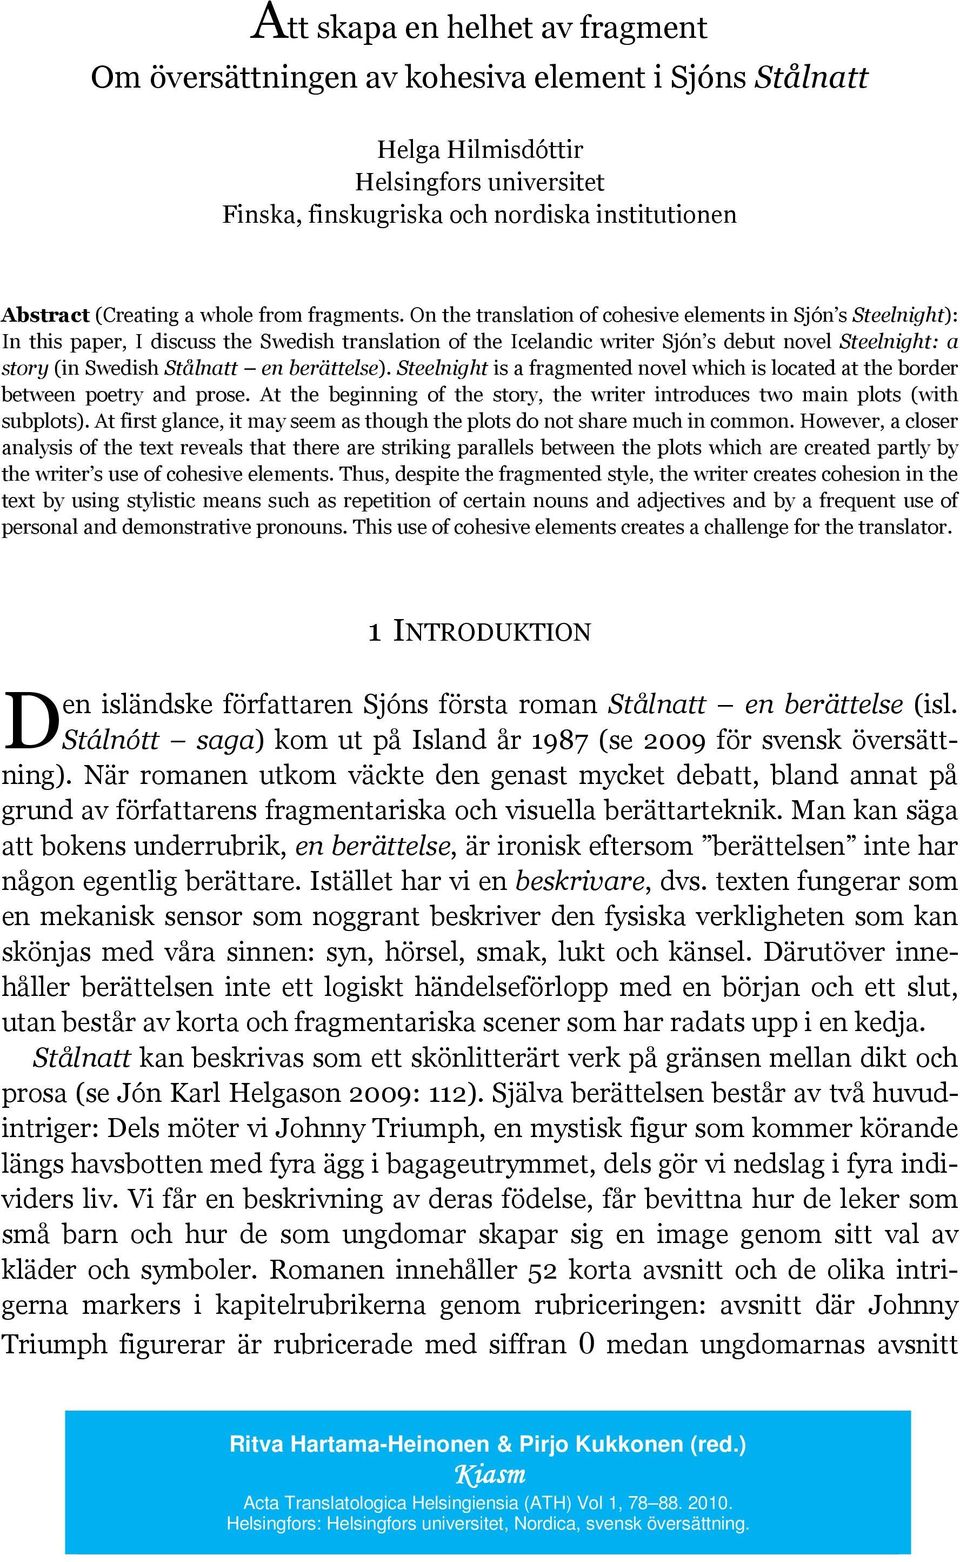 On the translation of cohesive elements in Sjón s Steelnight): In this paper, I discuss the Swedish translation of the Icelandic writer Sjón s debut novel Steelnight: a story (in Swedish Stålnatt en